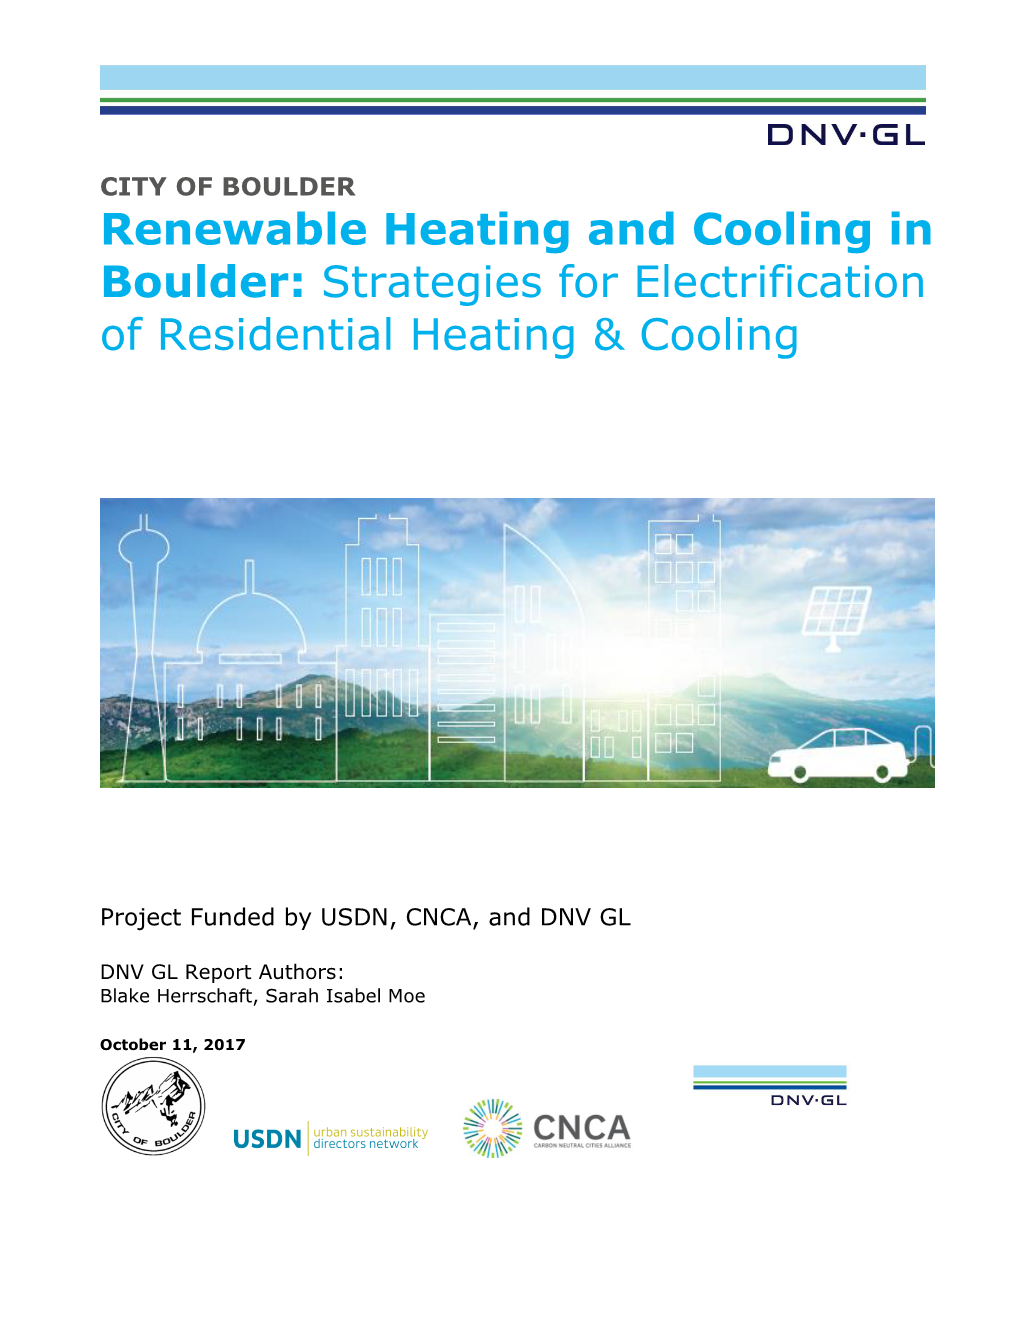 BOULDER Renewable Heating and Cooling in Boulder: Strategies for Electrification of Residential Heating & Cooling